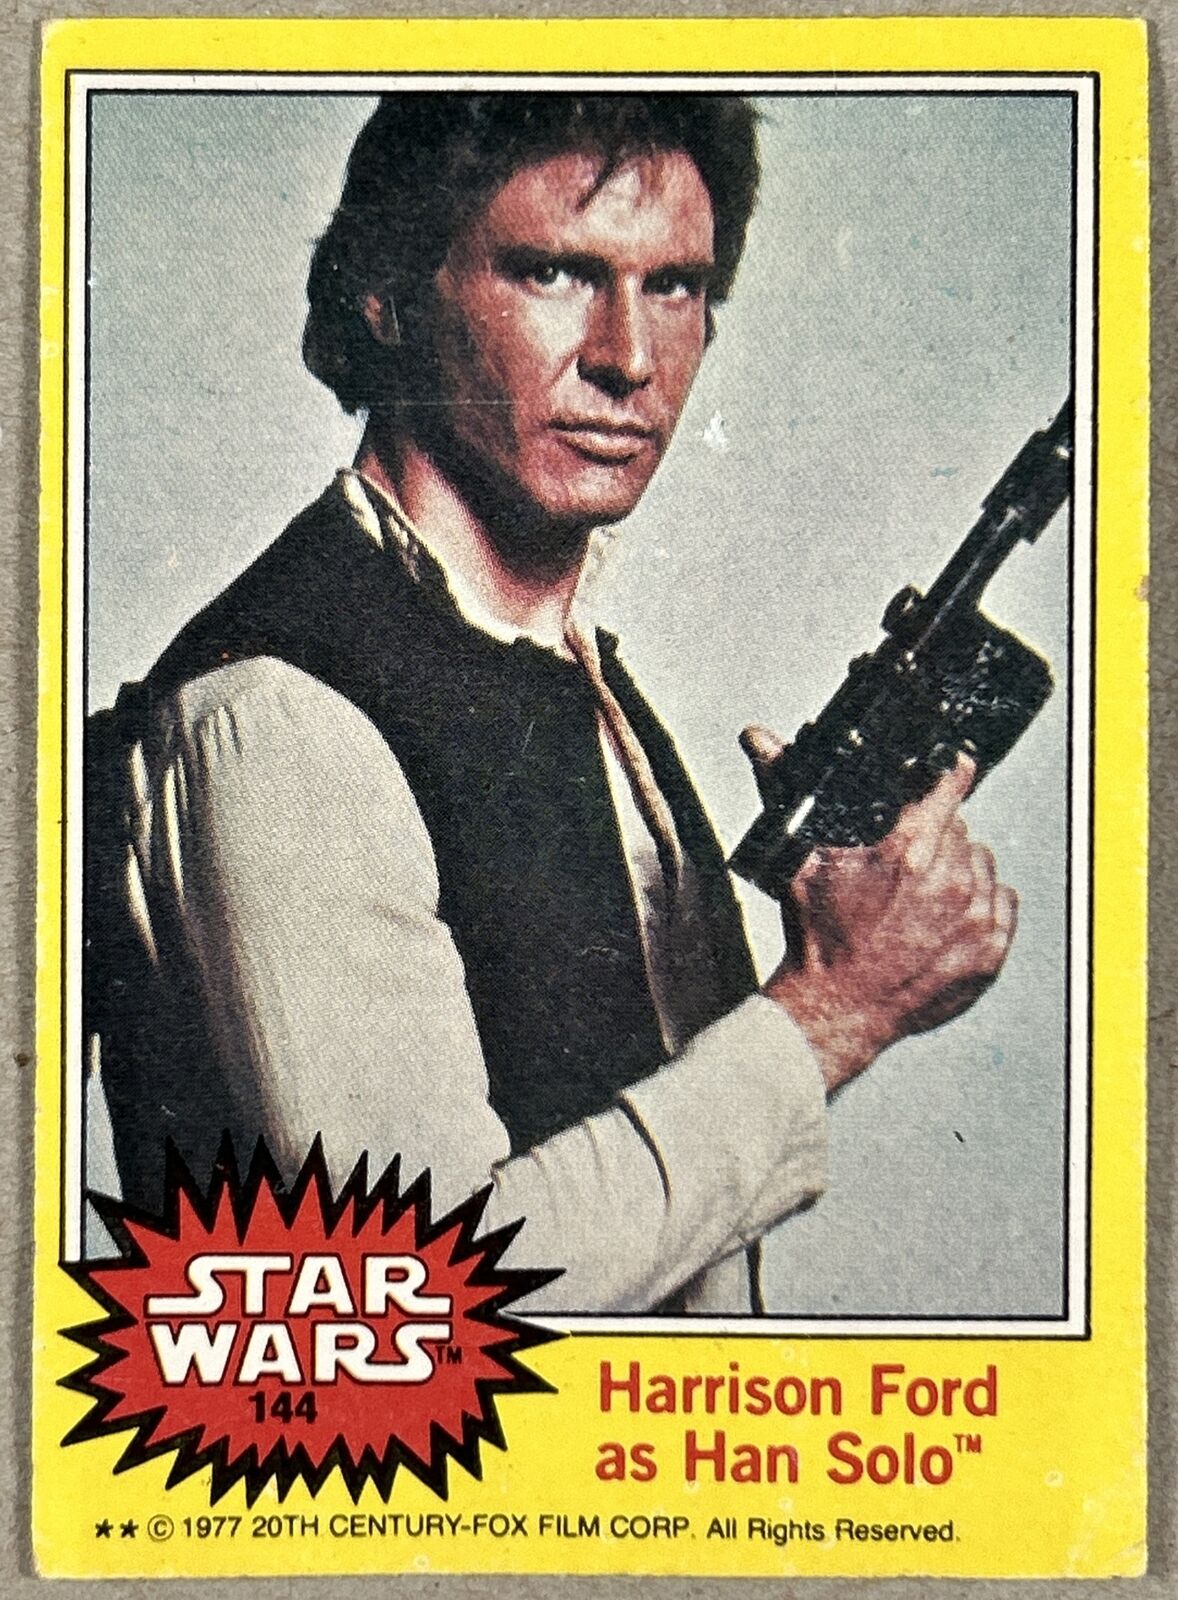 1977 Topps Star Wars #144 Harrison Ford as Han Solo Card Yellow Series 3